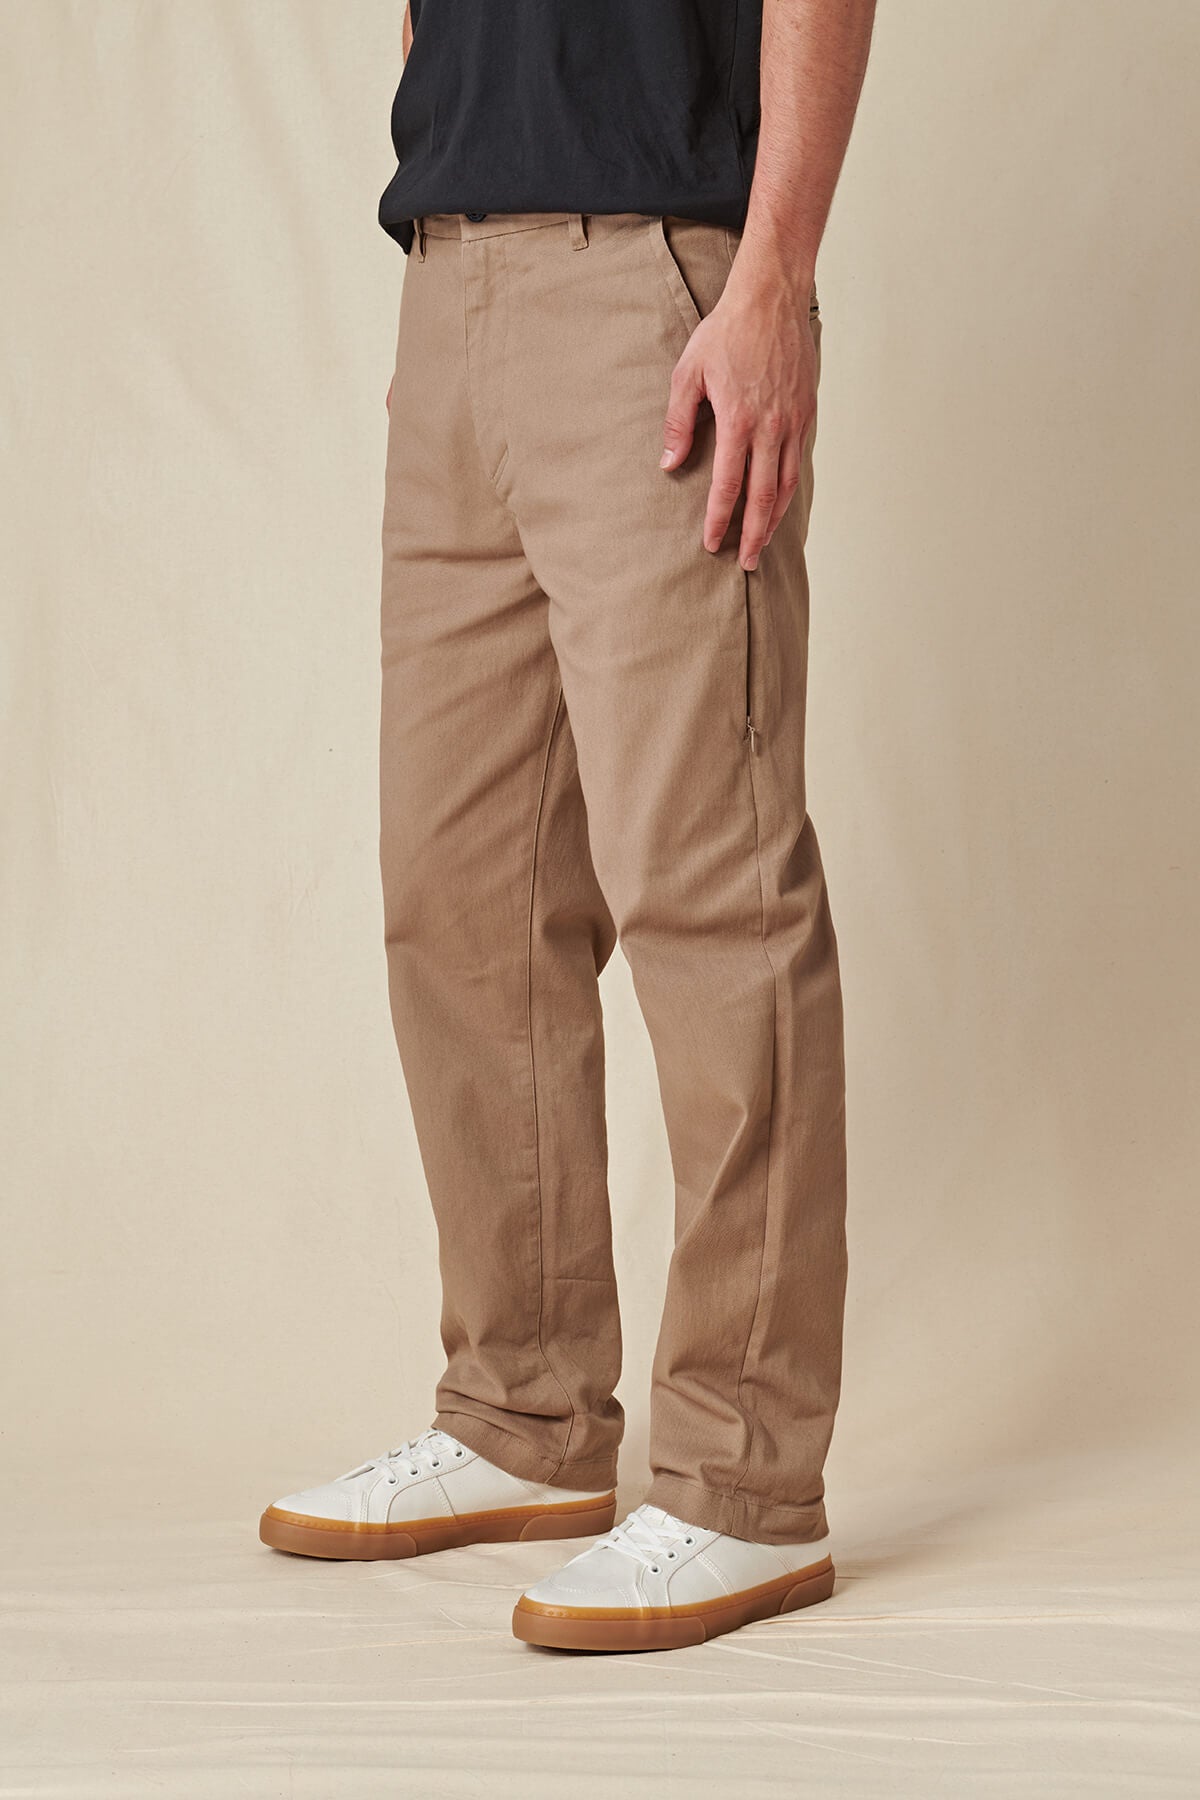 Globe PANTS Foundation Pant in Stone